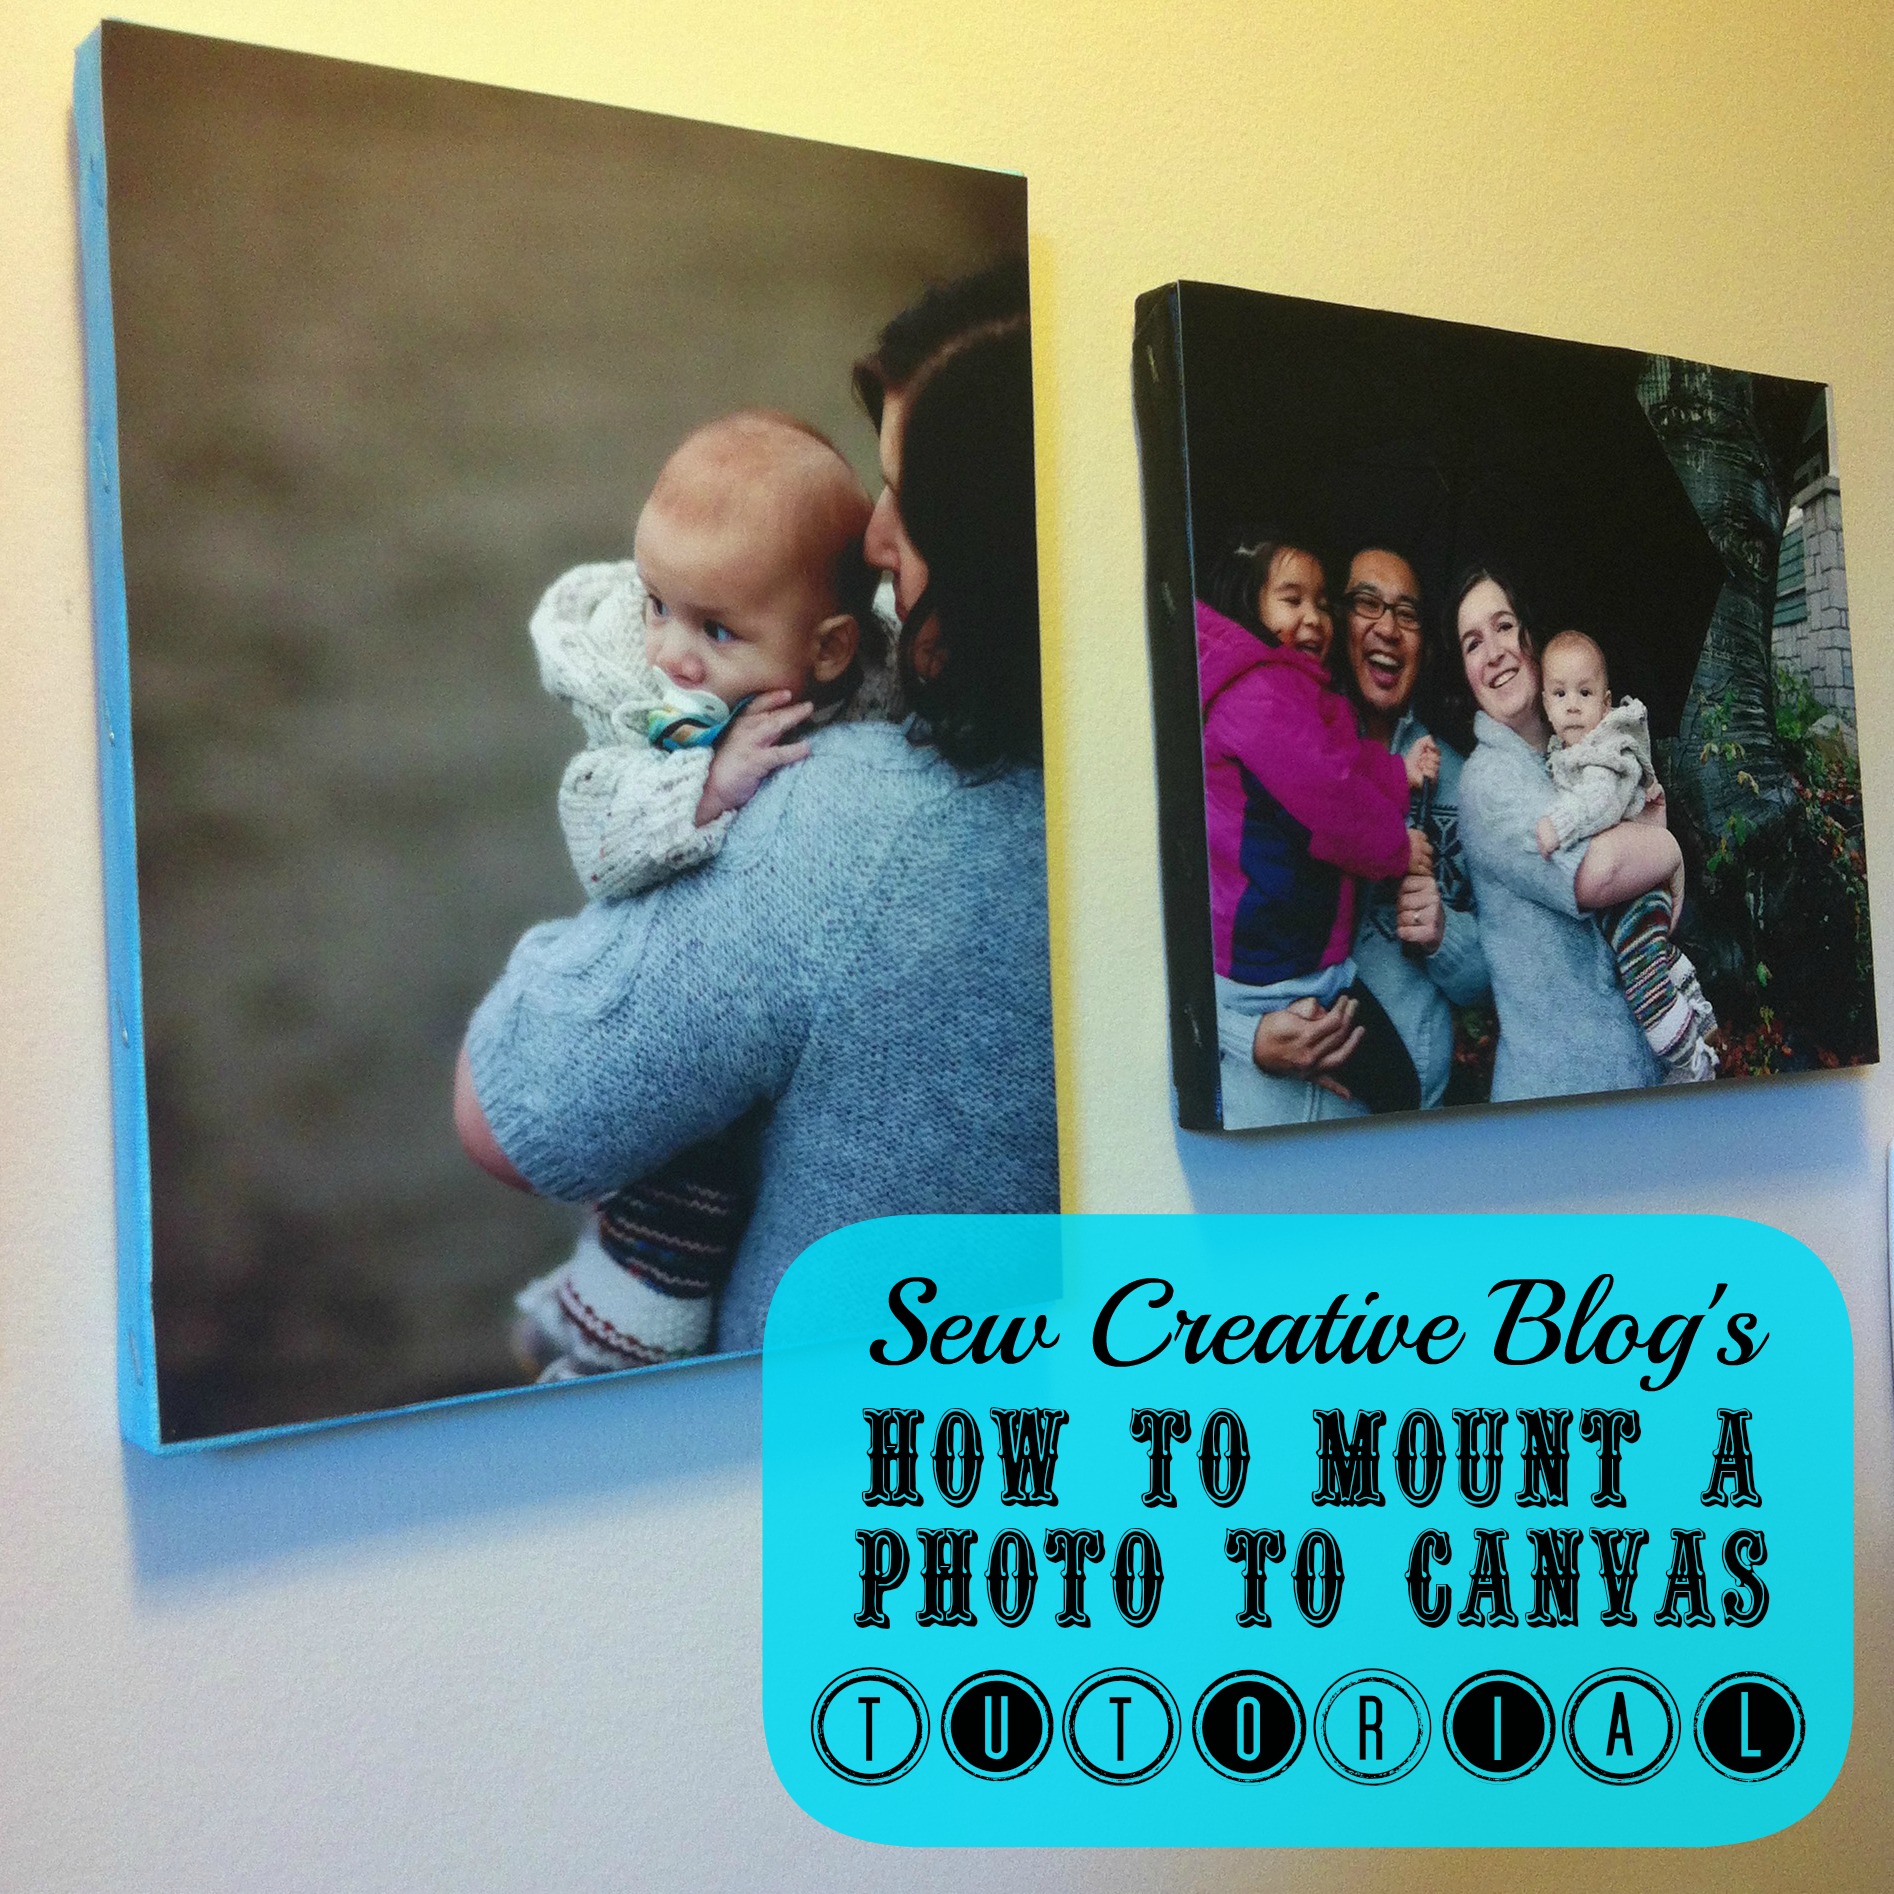 How to mount a photo to canvas tutorial A great handmade gift for under $5